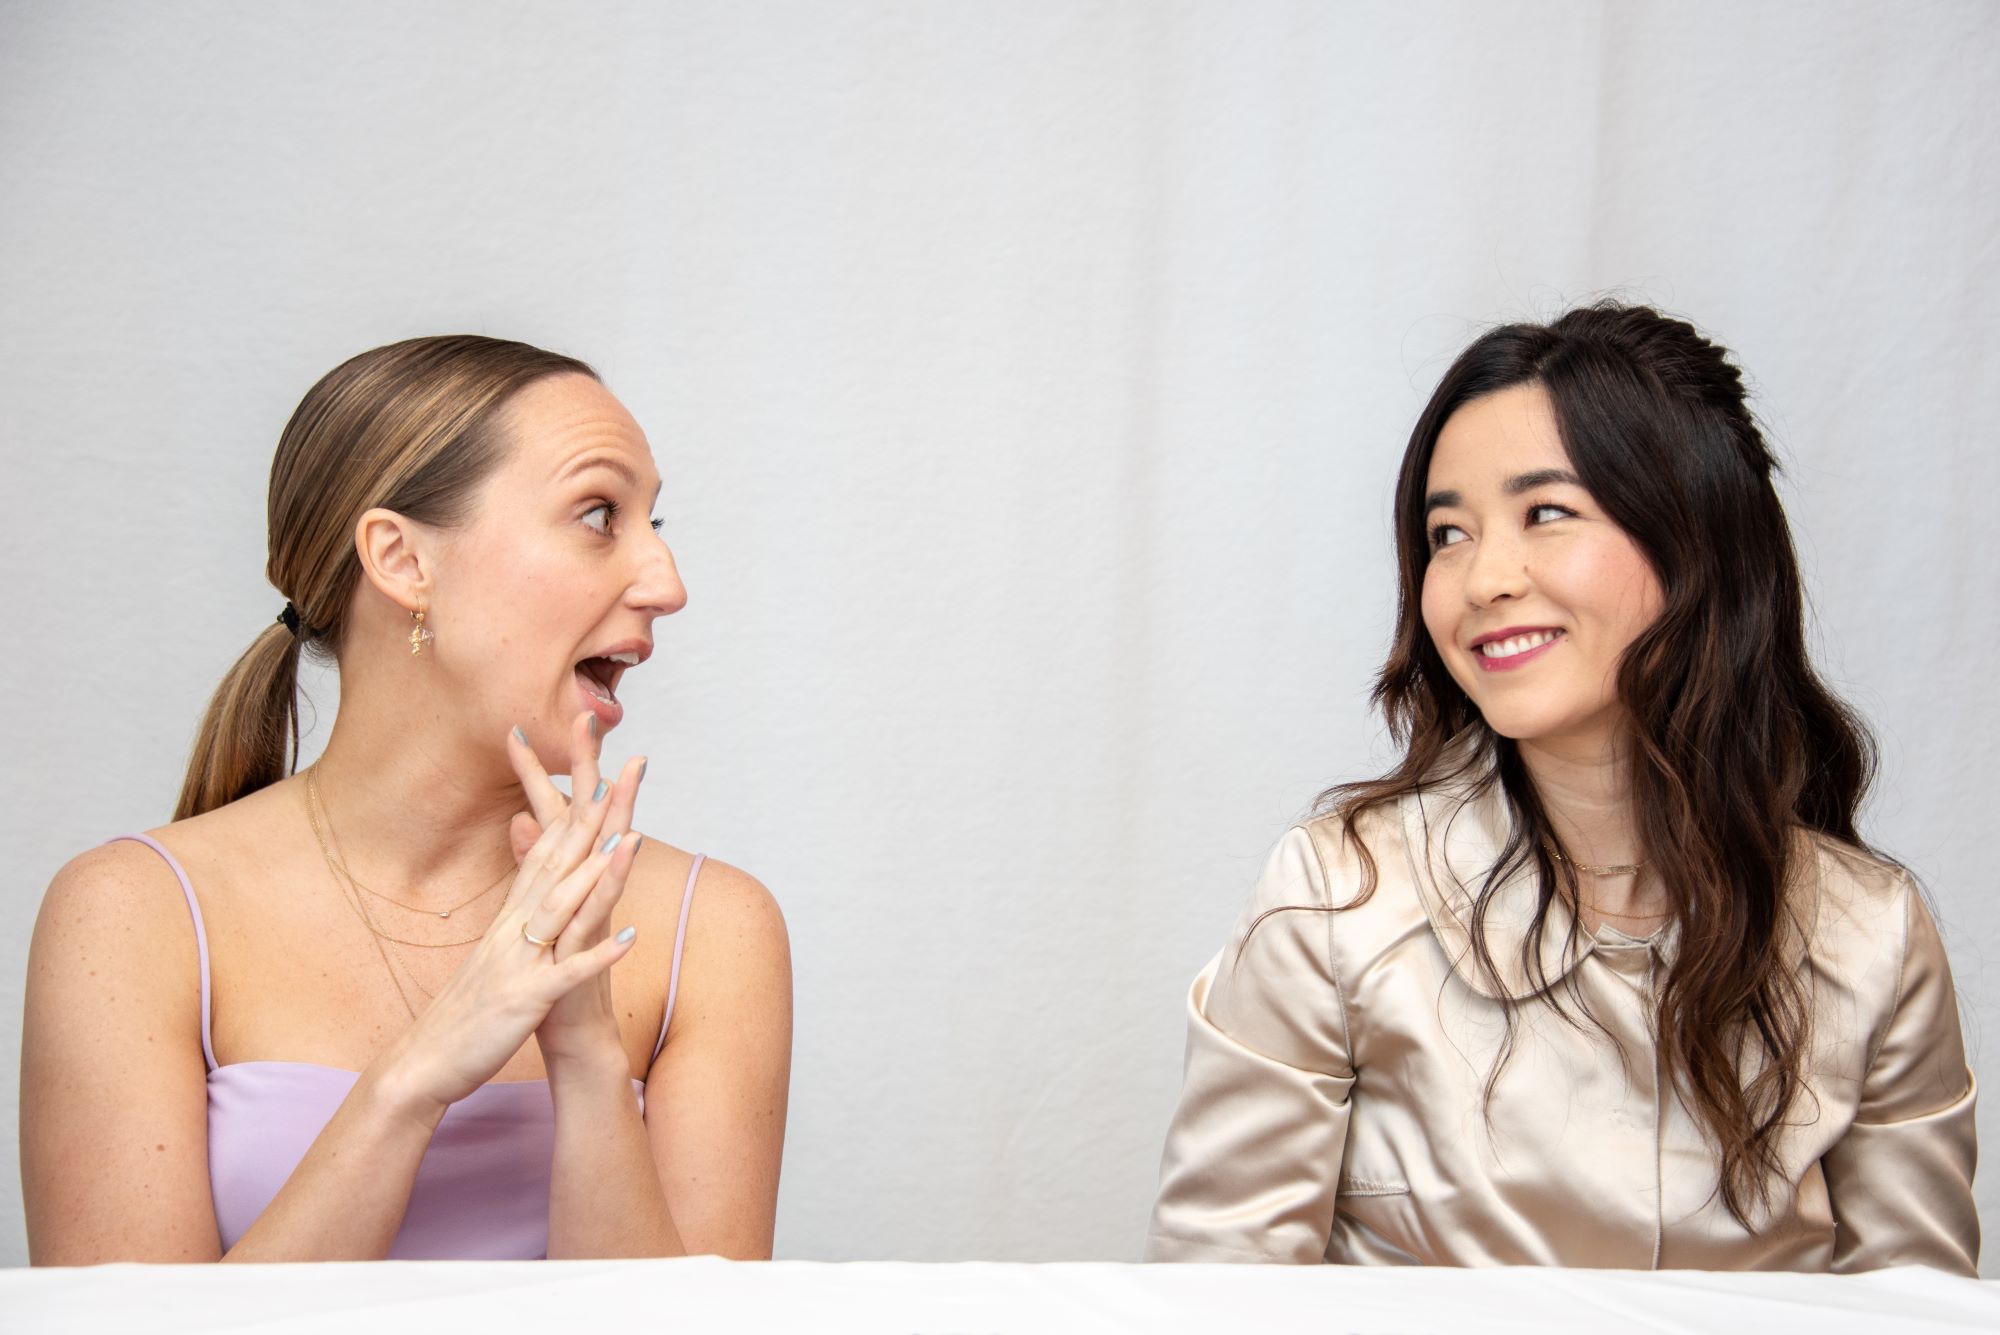 Anna Konkle and Maya Erskine at a PEN15 press conference